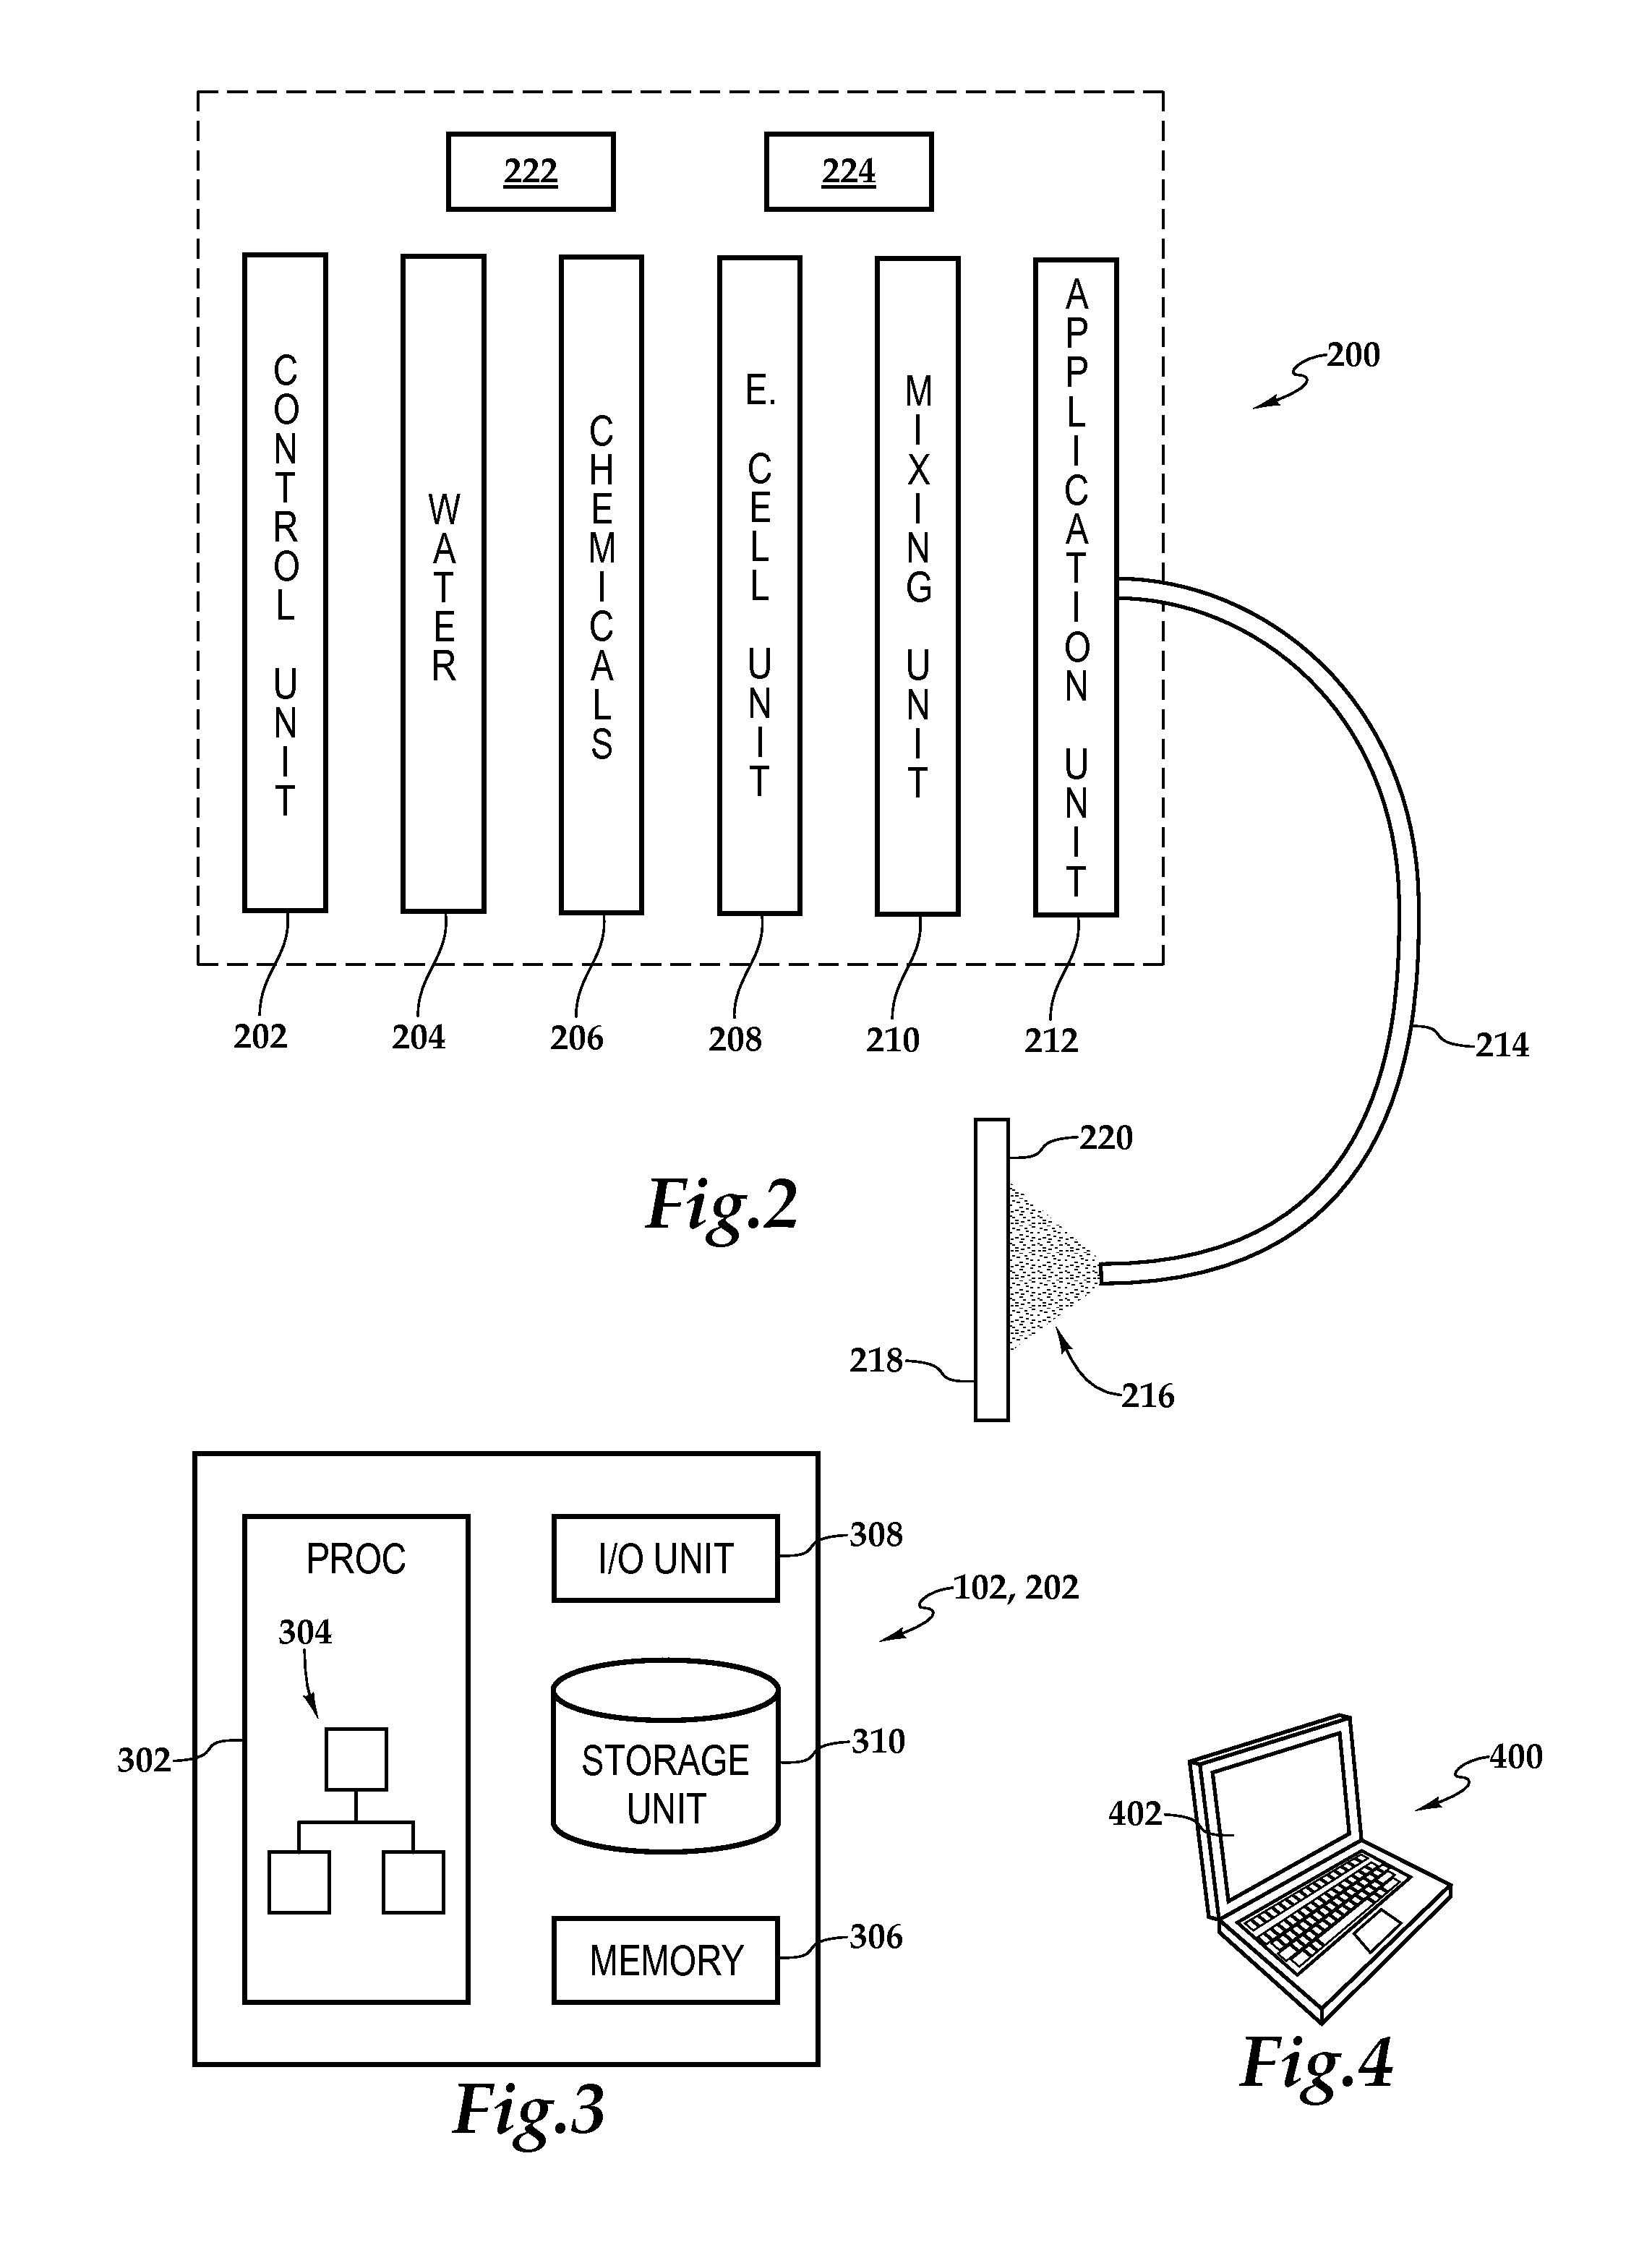 Electrolytic System and Method for Generating Biocides Having an Electron Deficient Carrier Fluid and Chlorine Dioxide